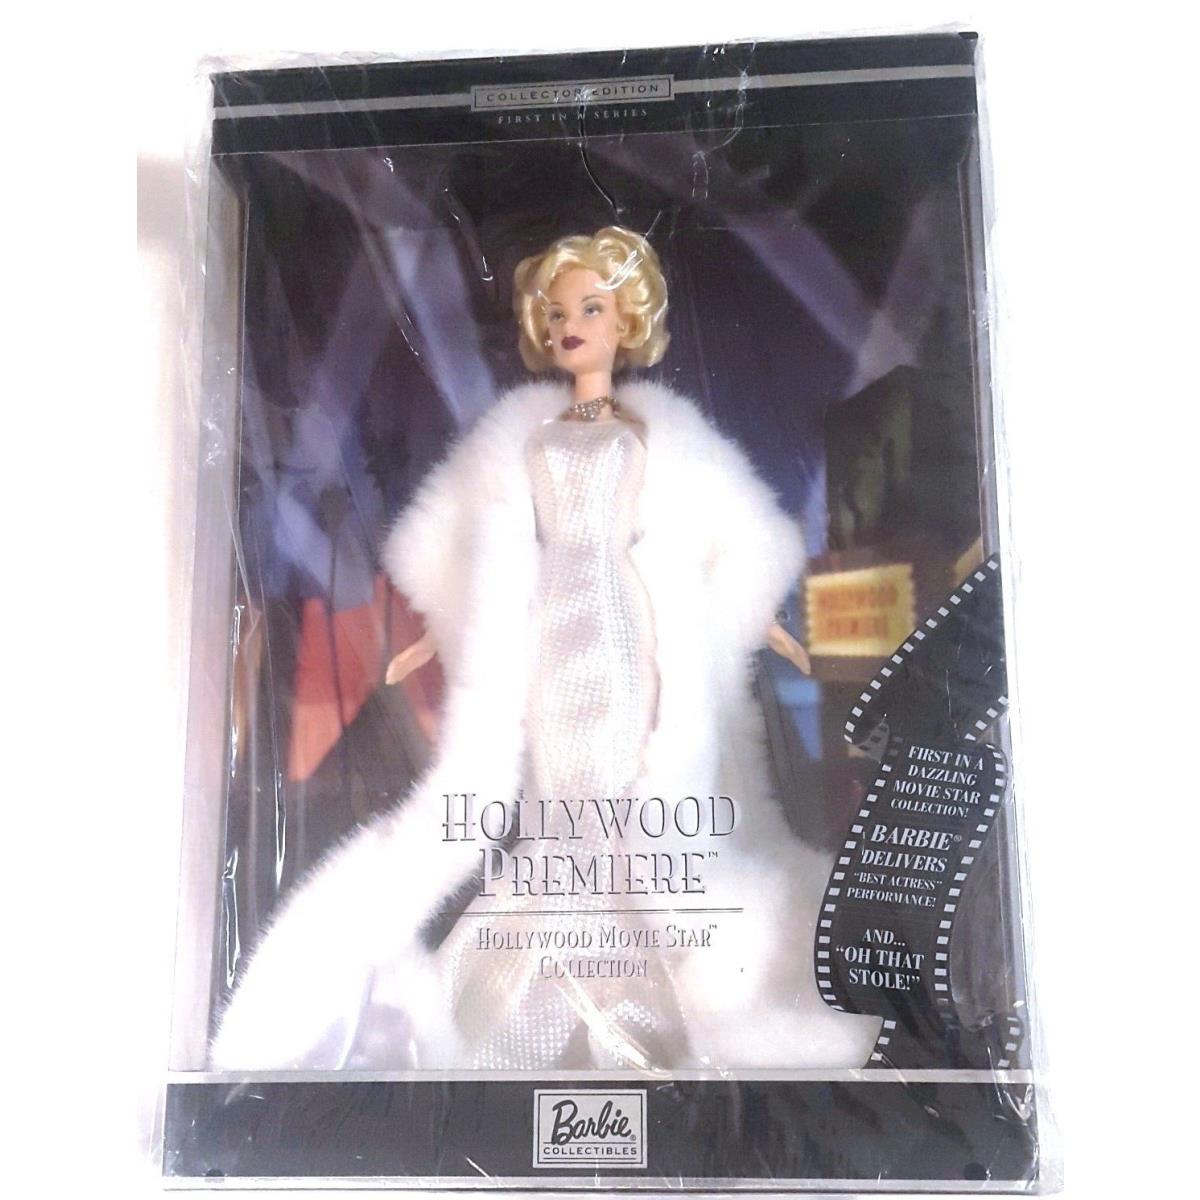 Hollywood Premiere Barbie 2000 Hollywood Movie Star Collection 26914